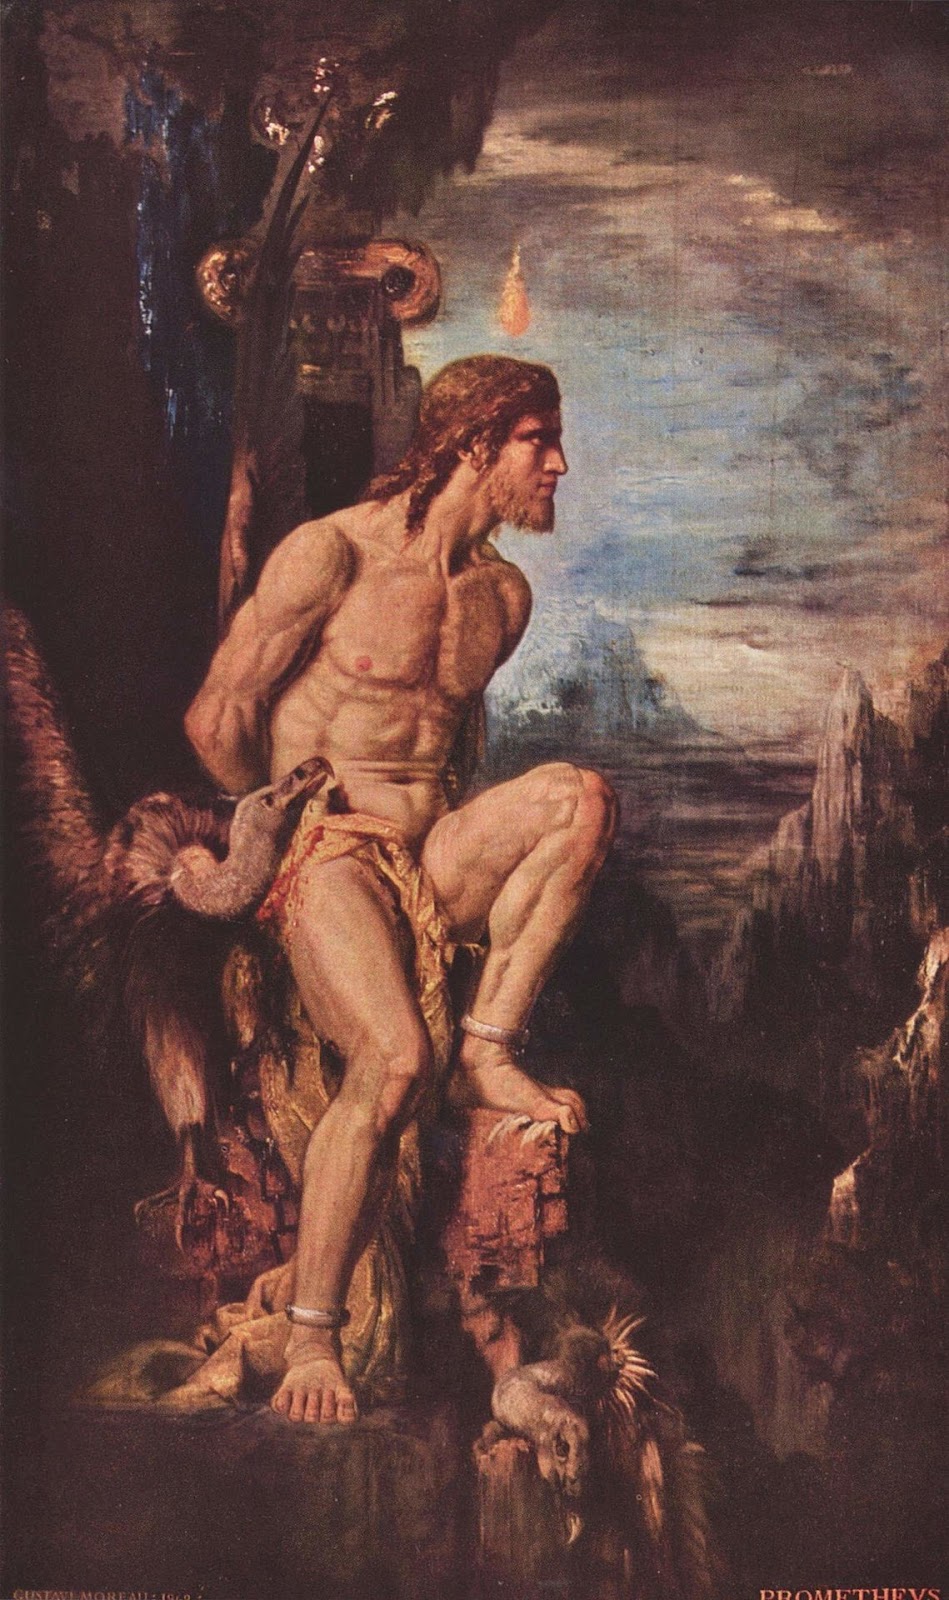 Prometheus (1868, illustrated by Gustave More), includes Hesiod's first Prometheus myth. Later it was probably adopted as the original form of Prometheus Bound, Prometheus Unbound and Prometheus Pyphoros, a trio of tragic plays by Achilles.